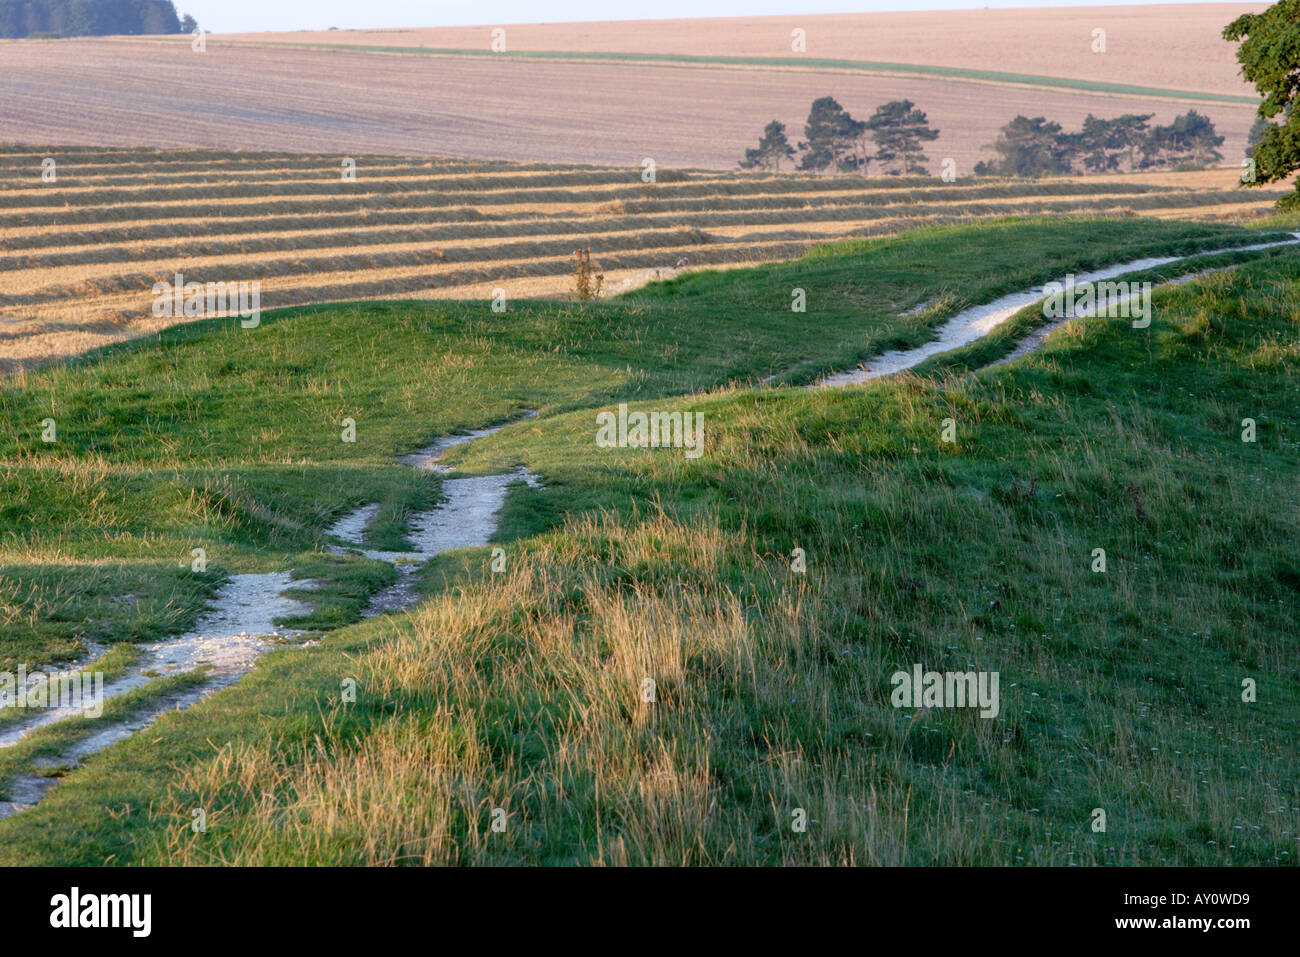 Eroded footpath on embankment of Avebury stone circle in Wiltshire Stock Photo